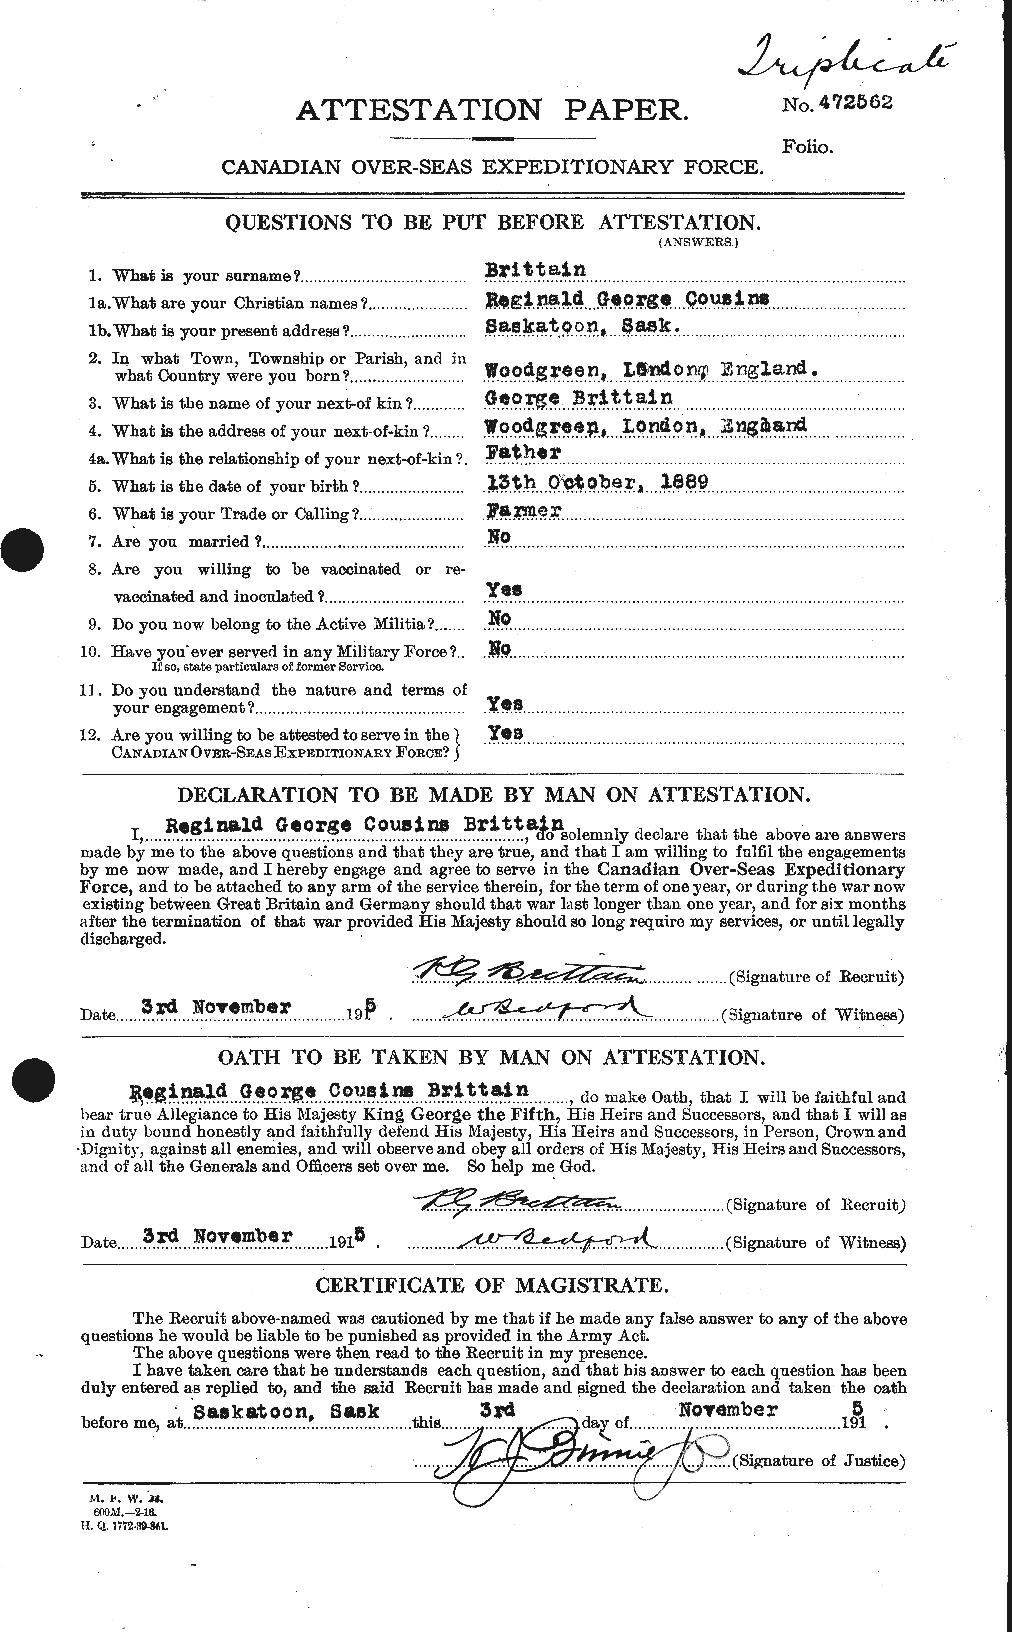 Personnel Records of the First World War - CEF 261859a